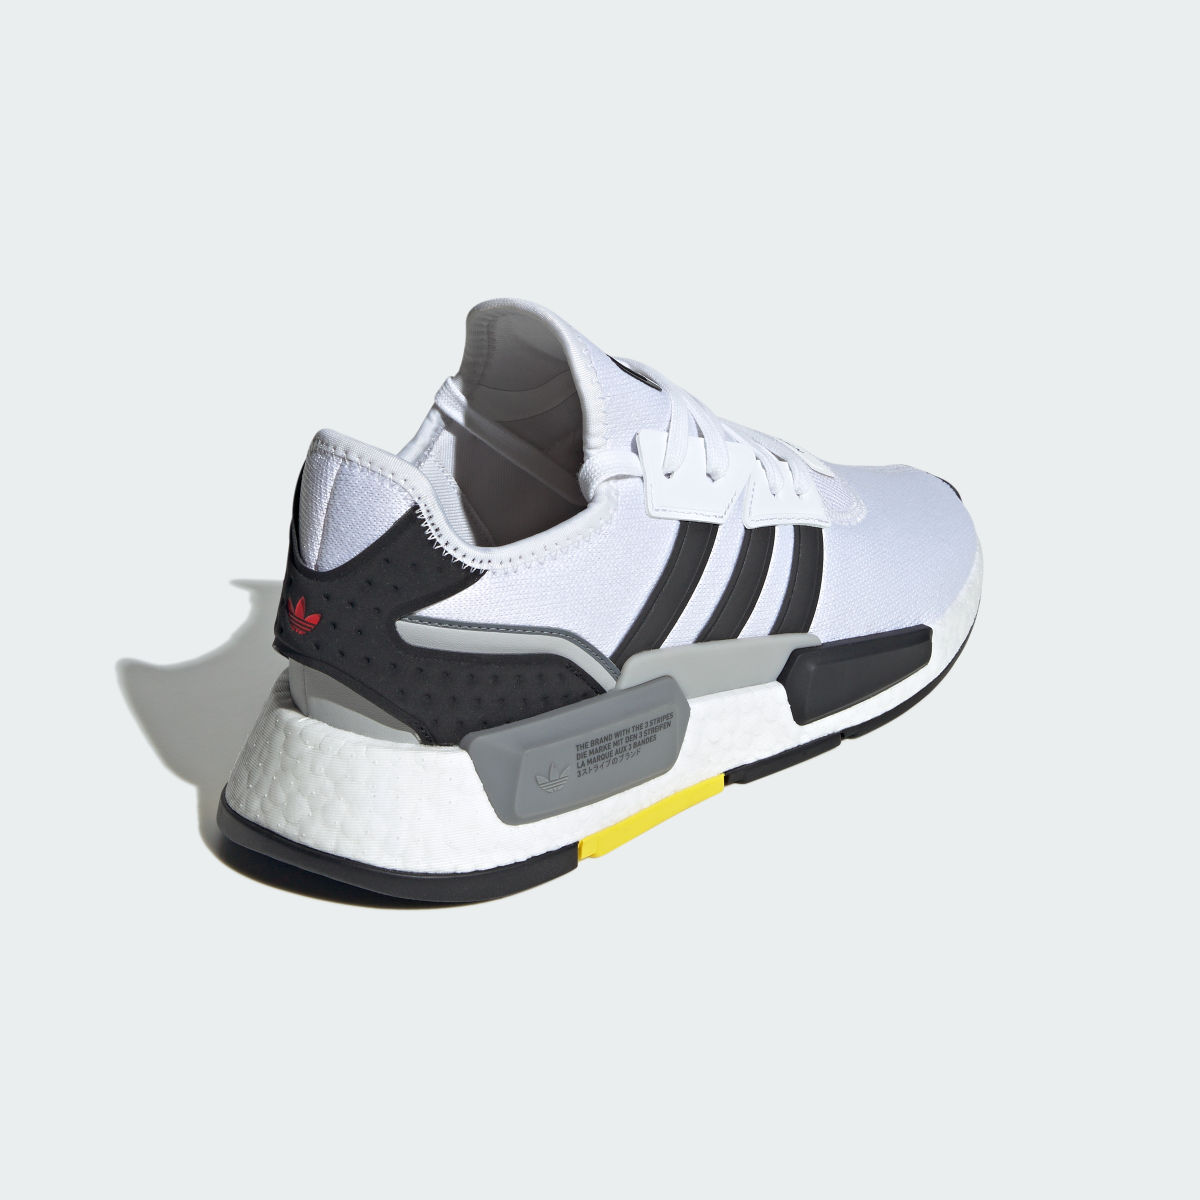 Adidas NMD_G1 Shoes. 12